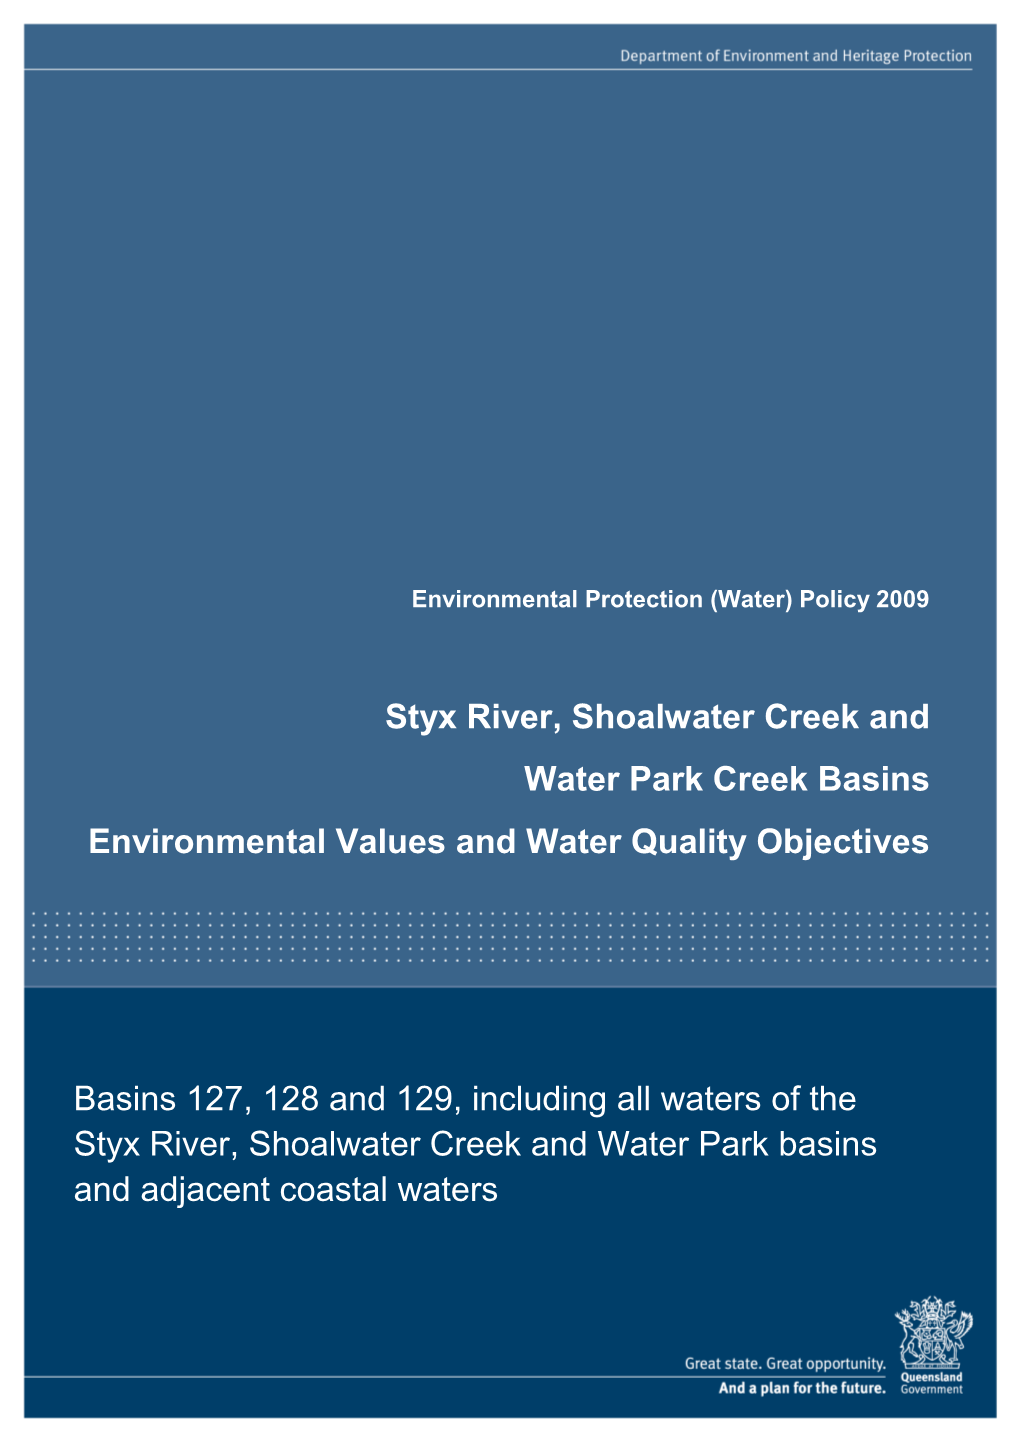 Styx River, Shoalwater Creek and Water Park Creek Basins Environmental Values and Water Quality Objectives